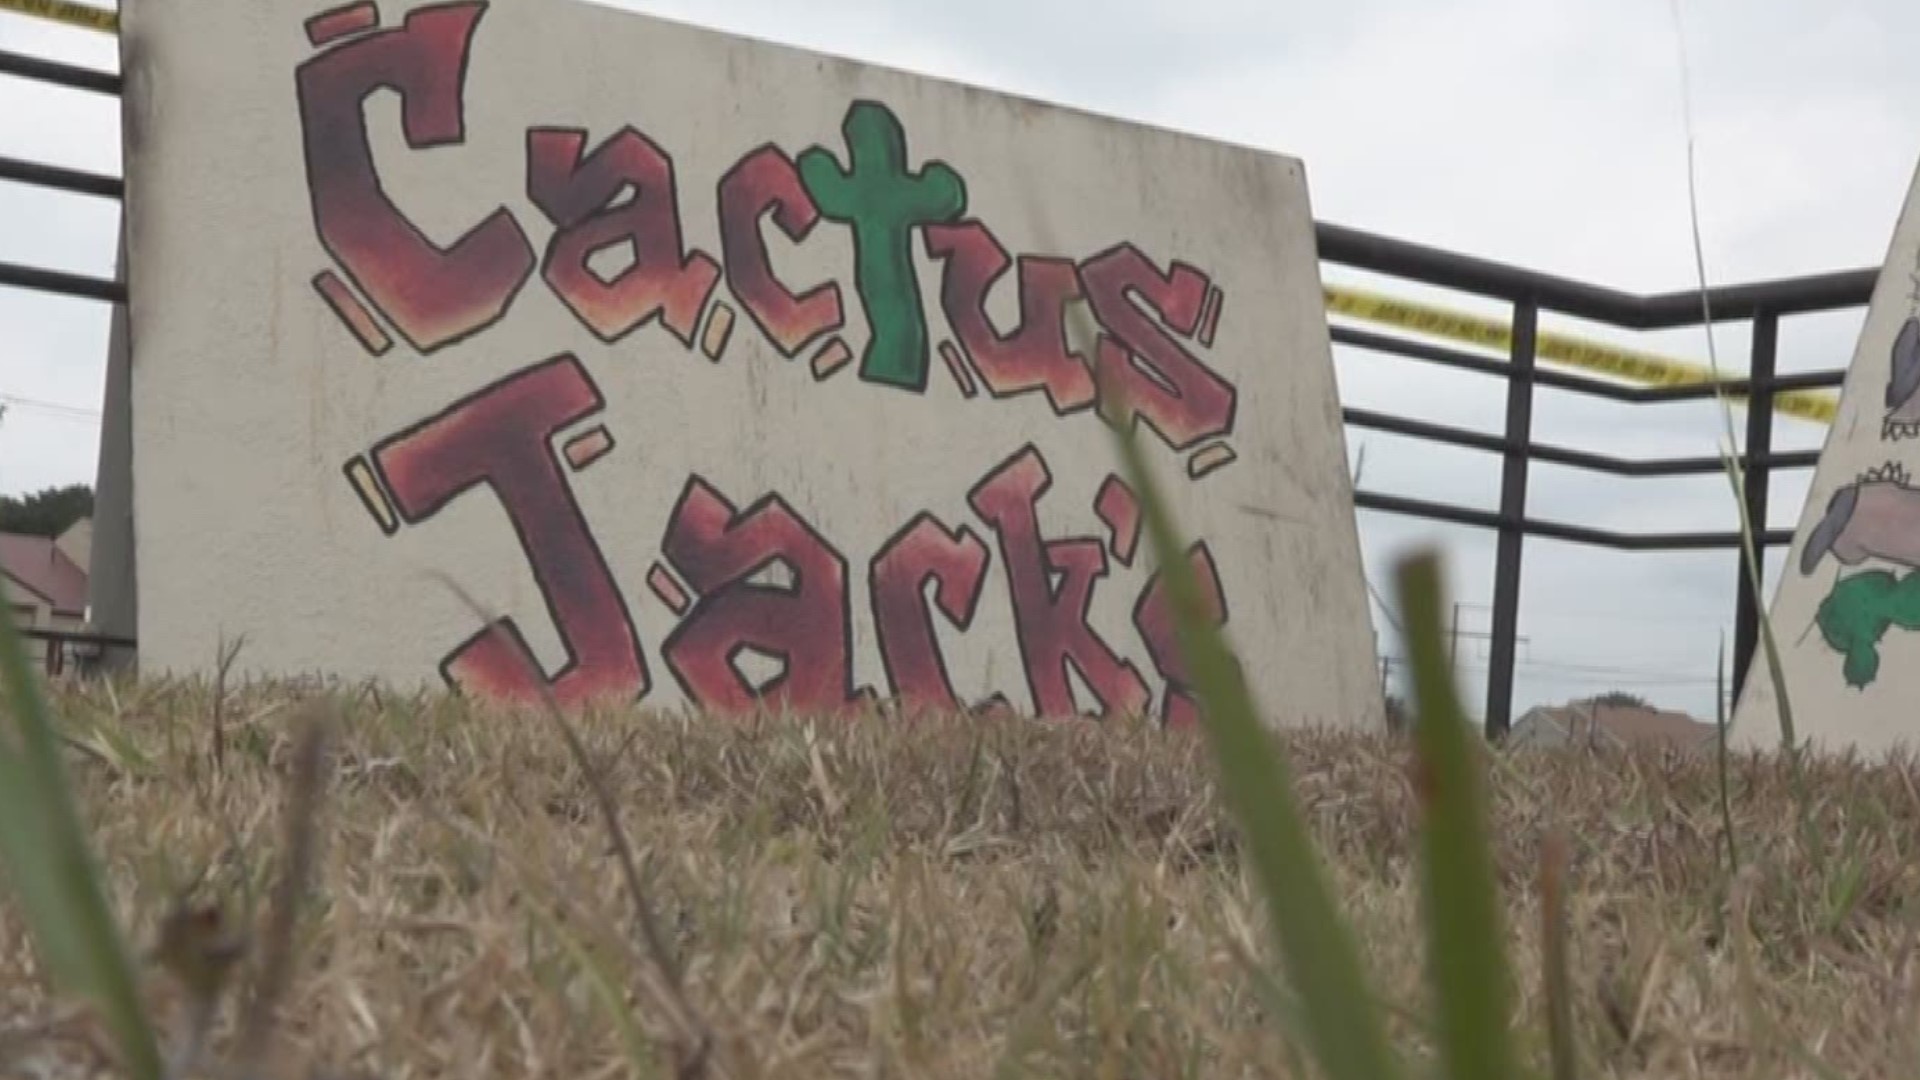 Almost two weeks after Cactus Jack's lost its building in a devastating fire, the community is showing its support for the popular bar and its employees.